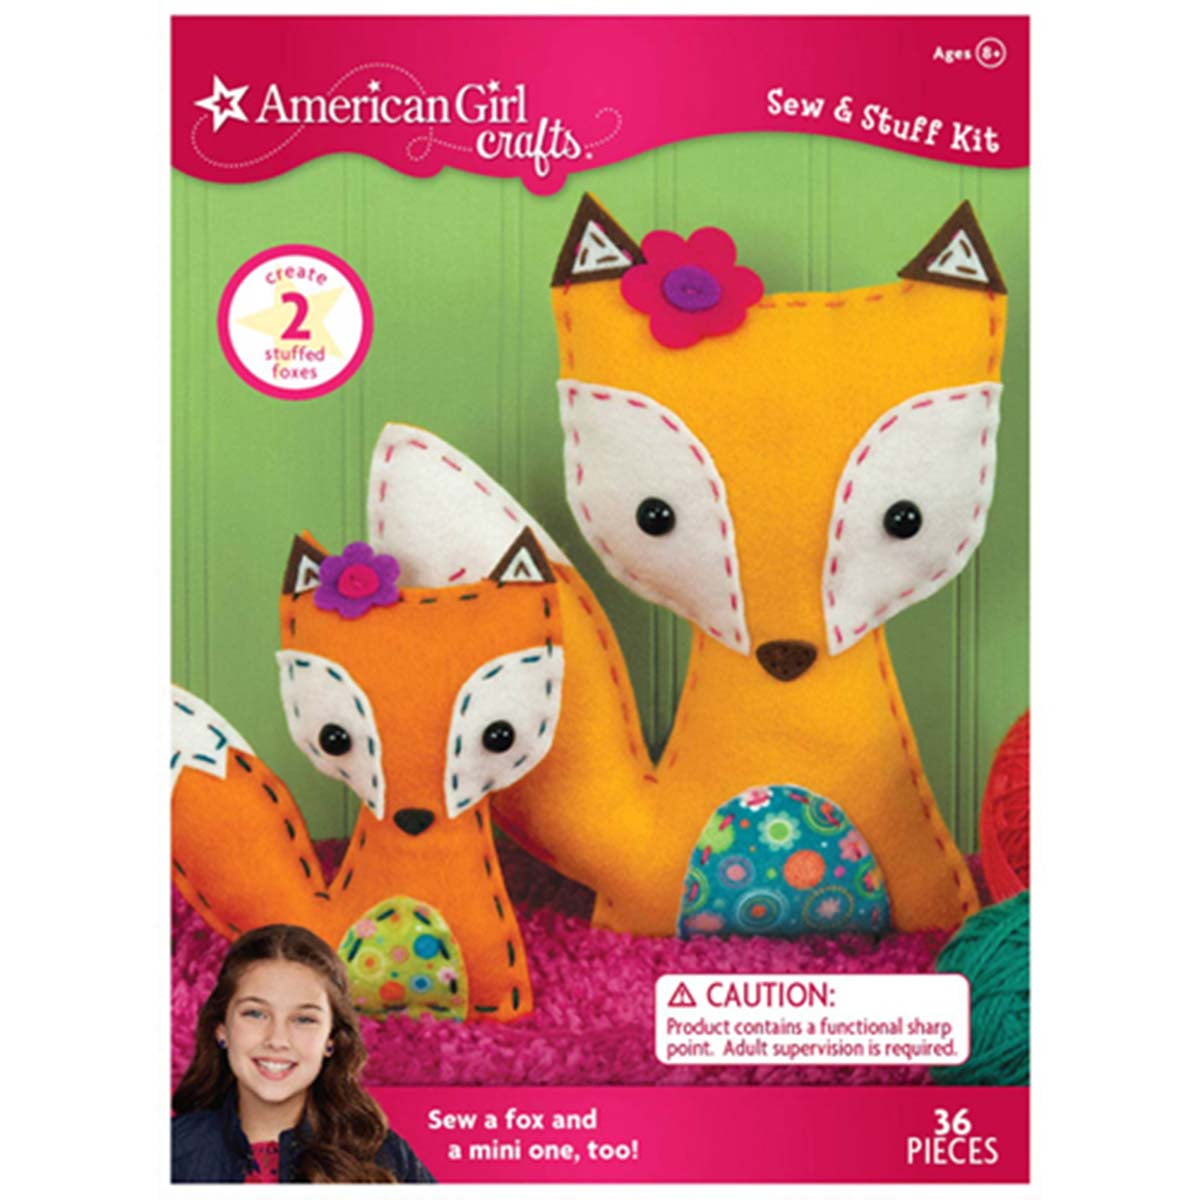 New AMERICAN GIRL Crafts Sew & Shares Kit CHICKS 